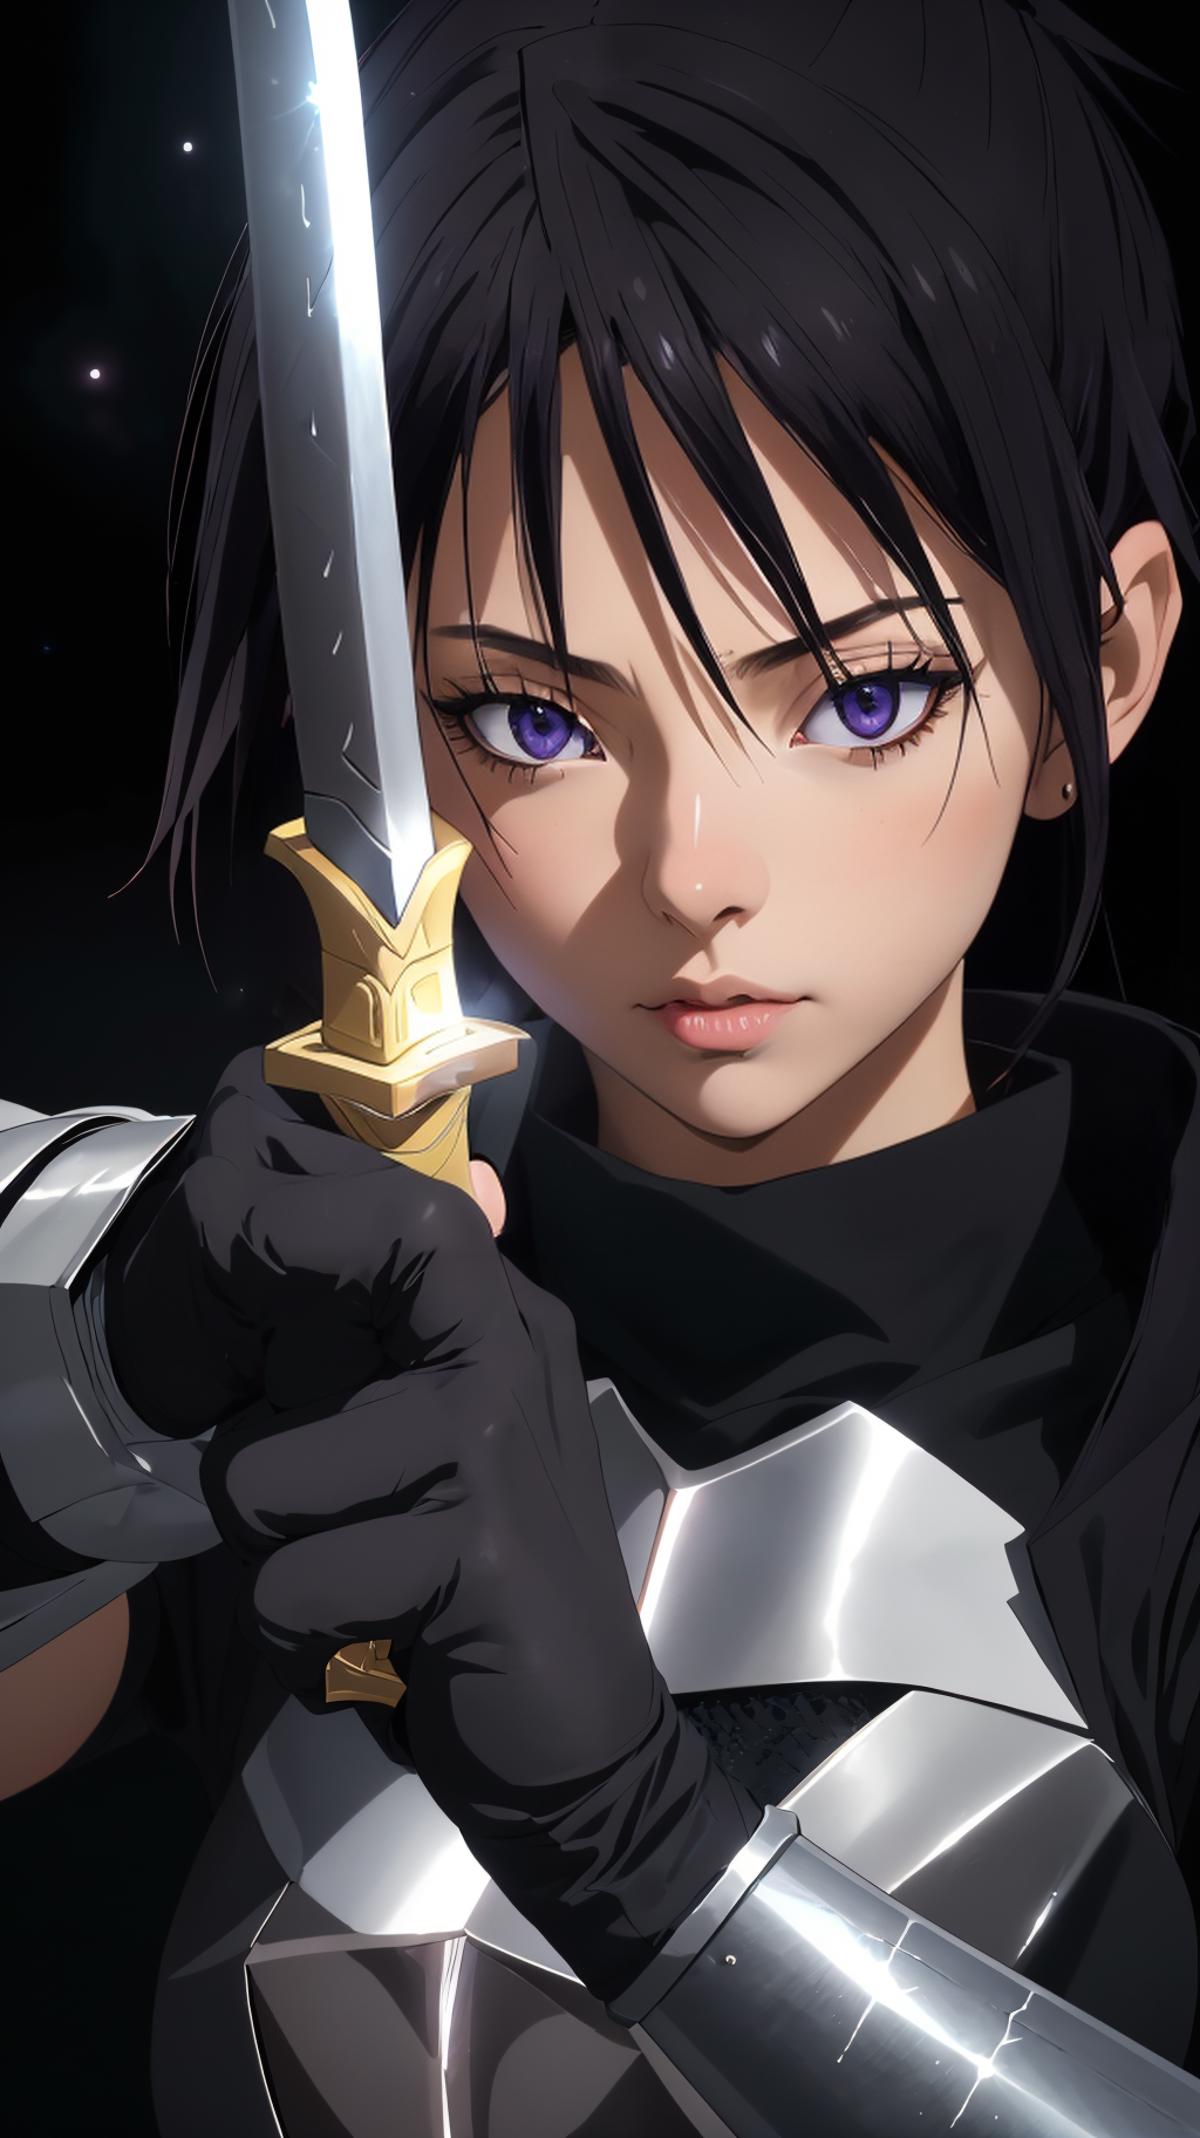 A young woman holding a sword with purple eyes.